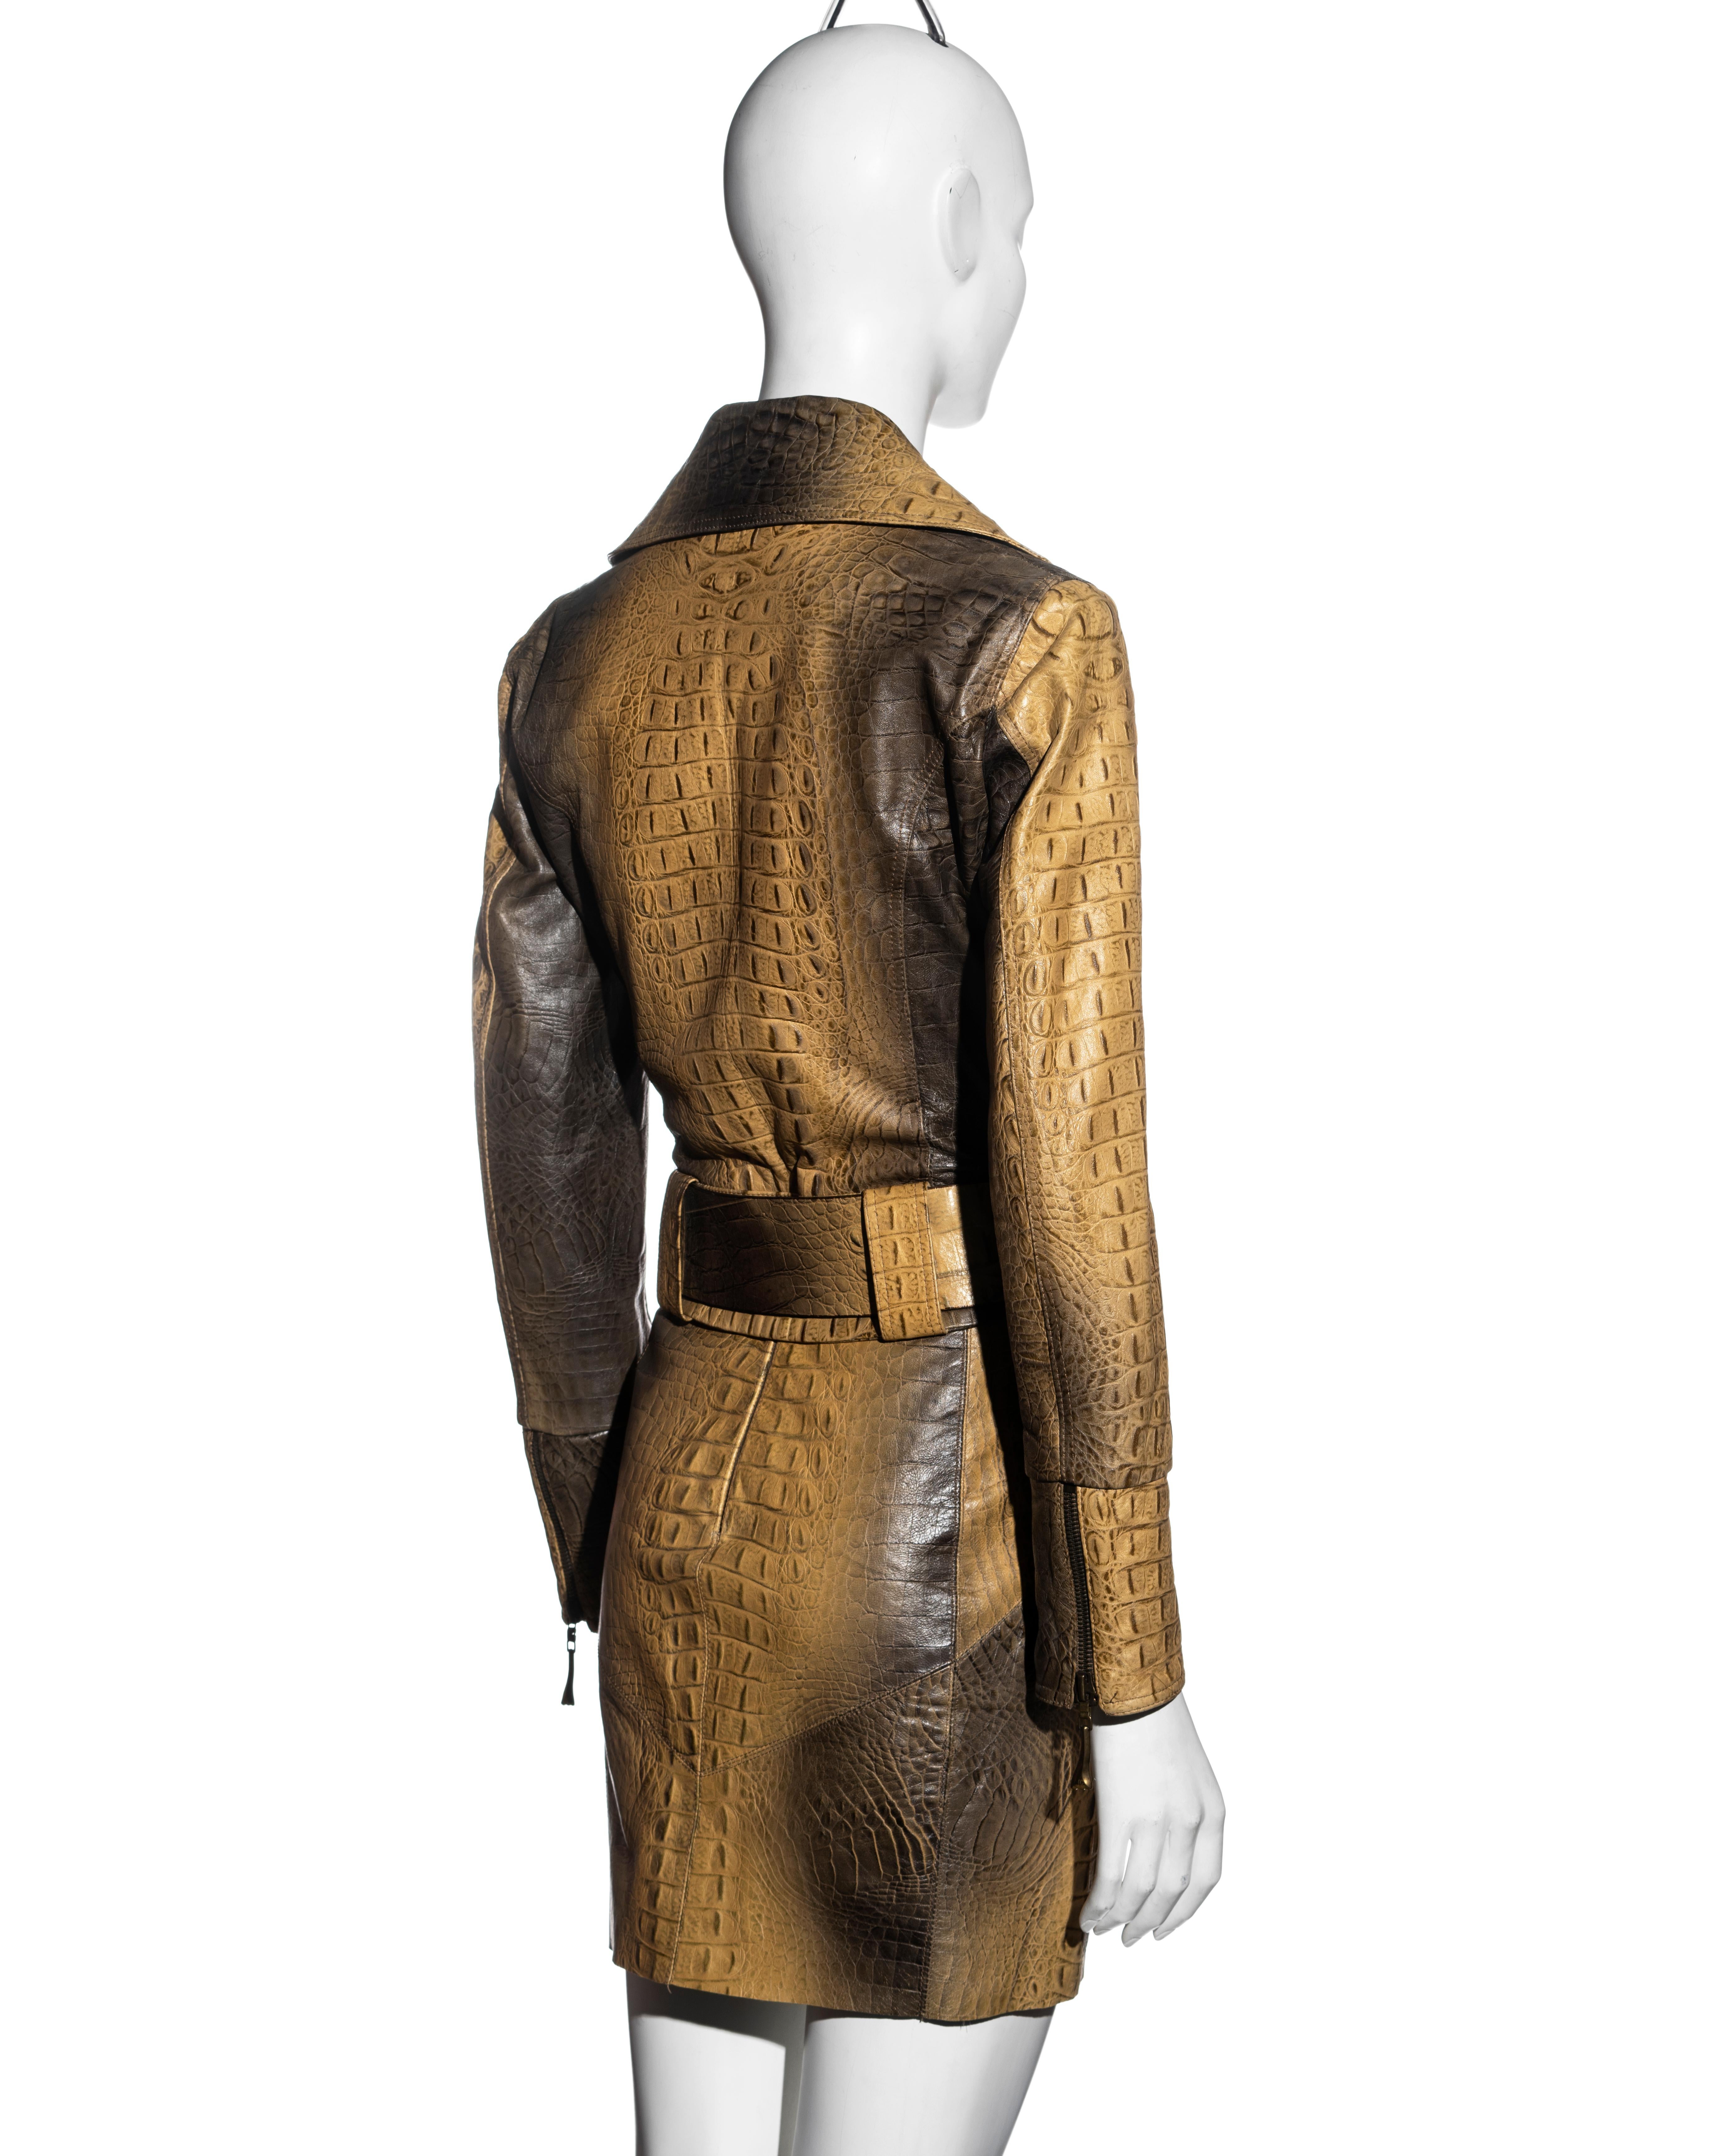 Roberto Cavalli beige croc-embossed leather jacket and mini skirt set, fw 2000 In Excellent Condition For Sale In London, GB